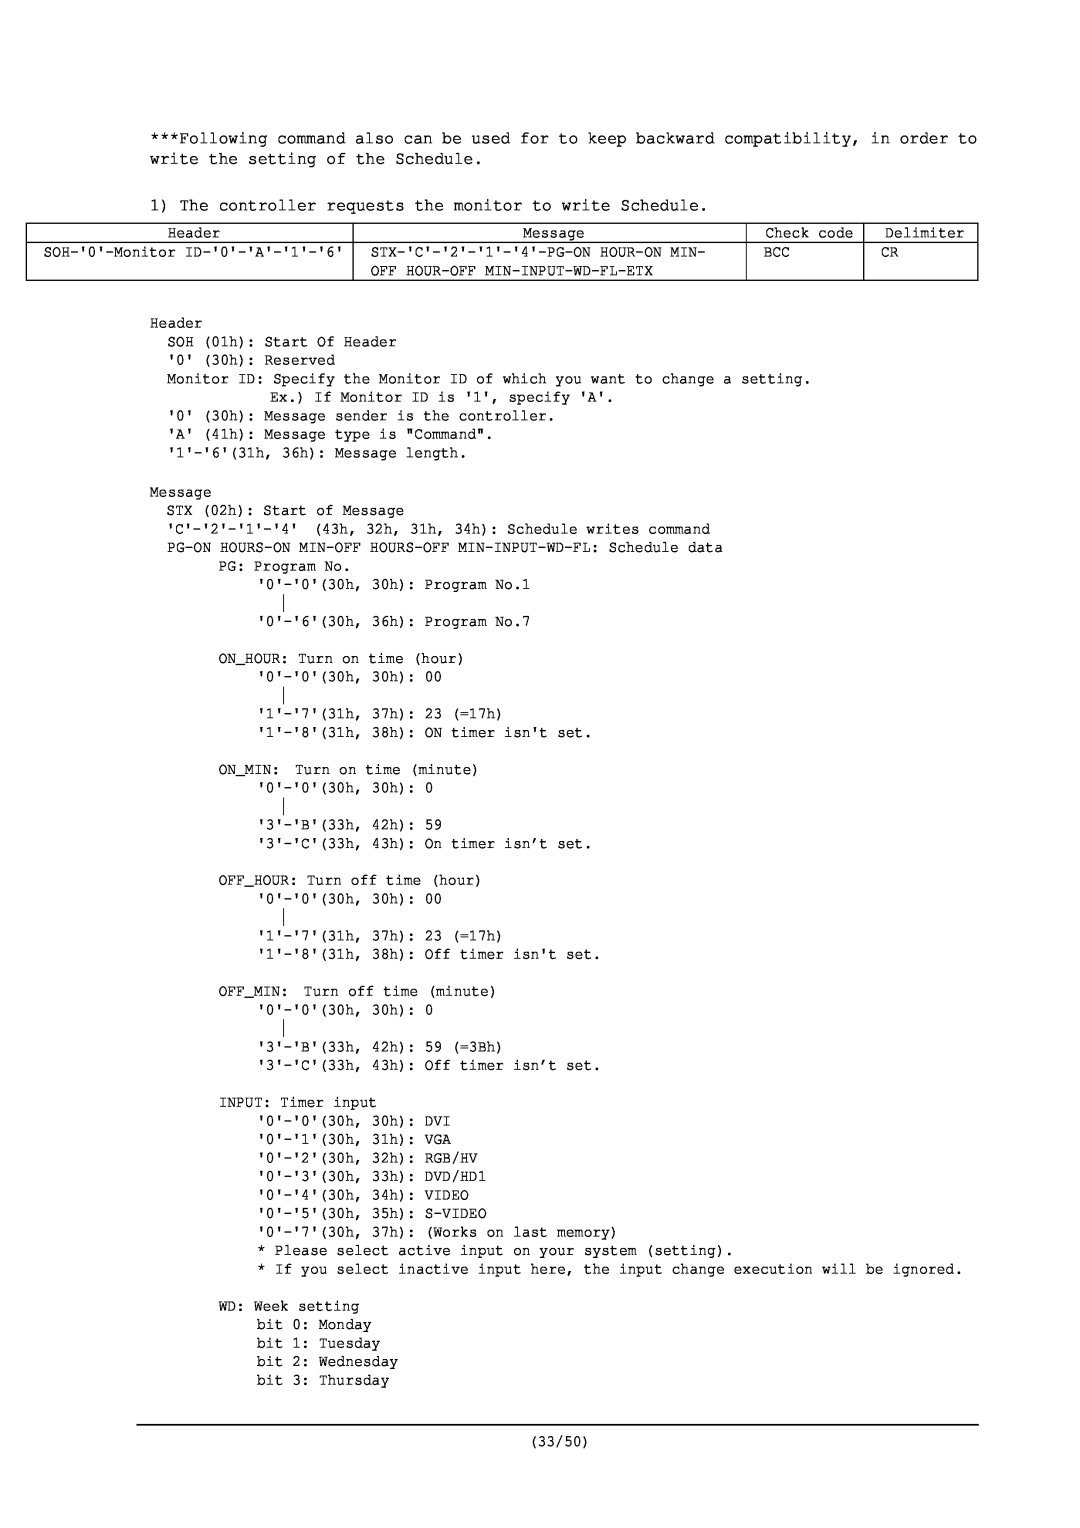 NEC RS-232C user manual The controller requests the monitor to write Schedule 